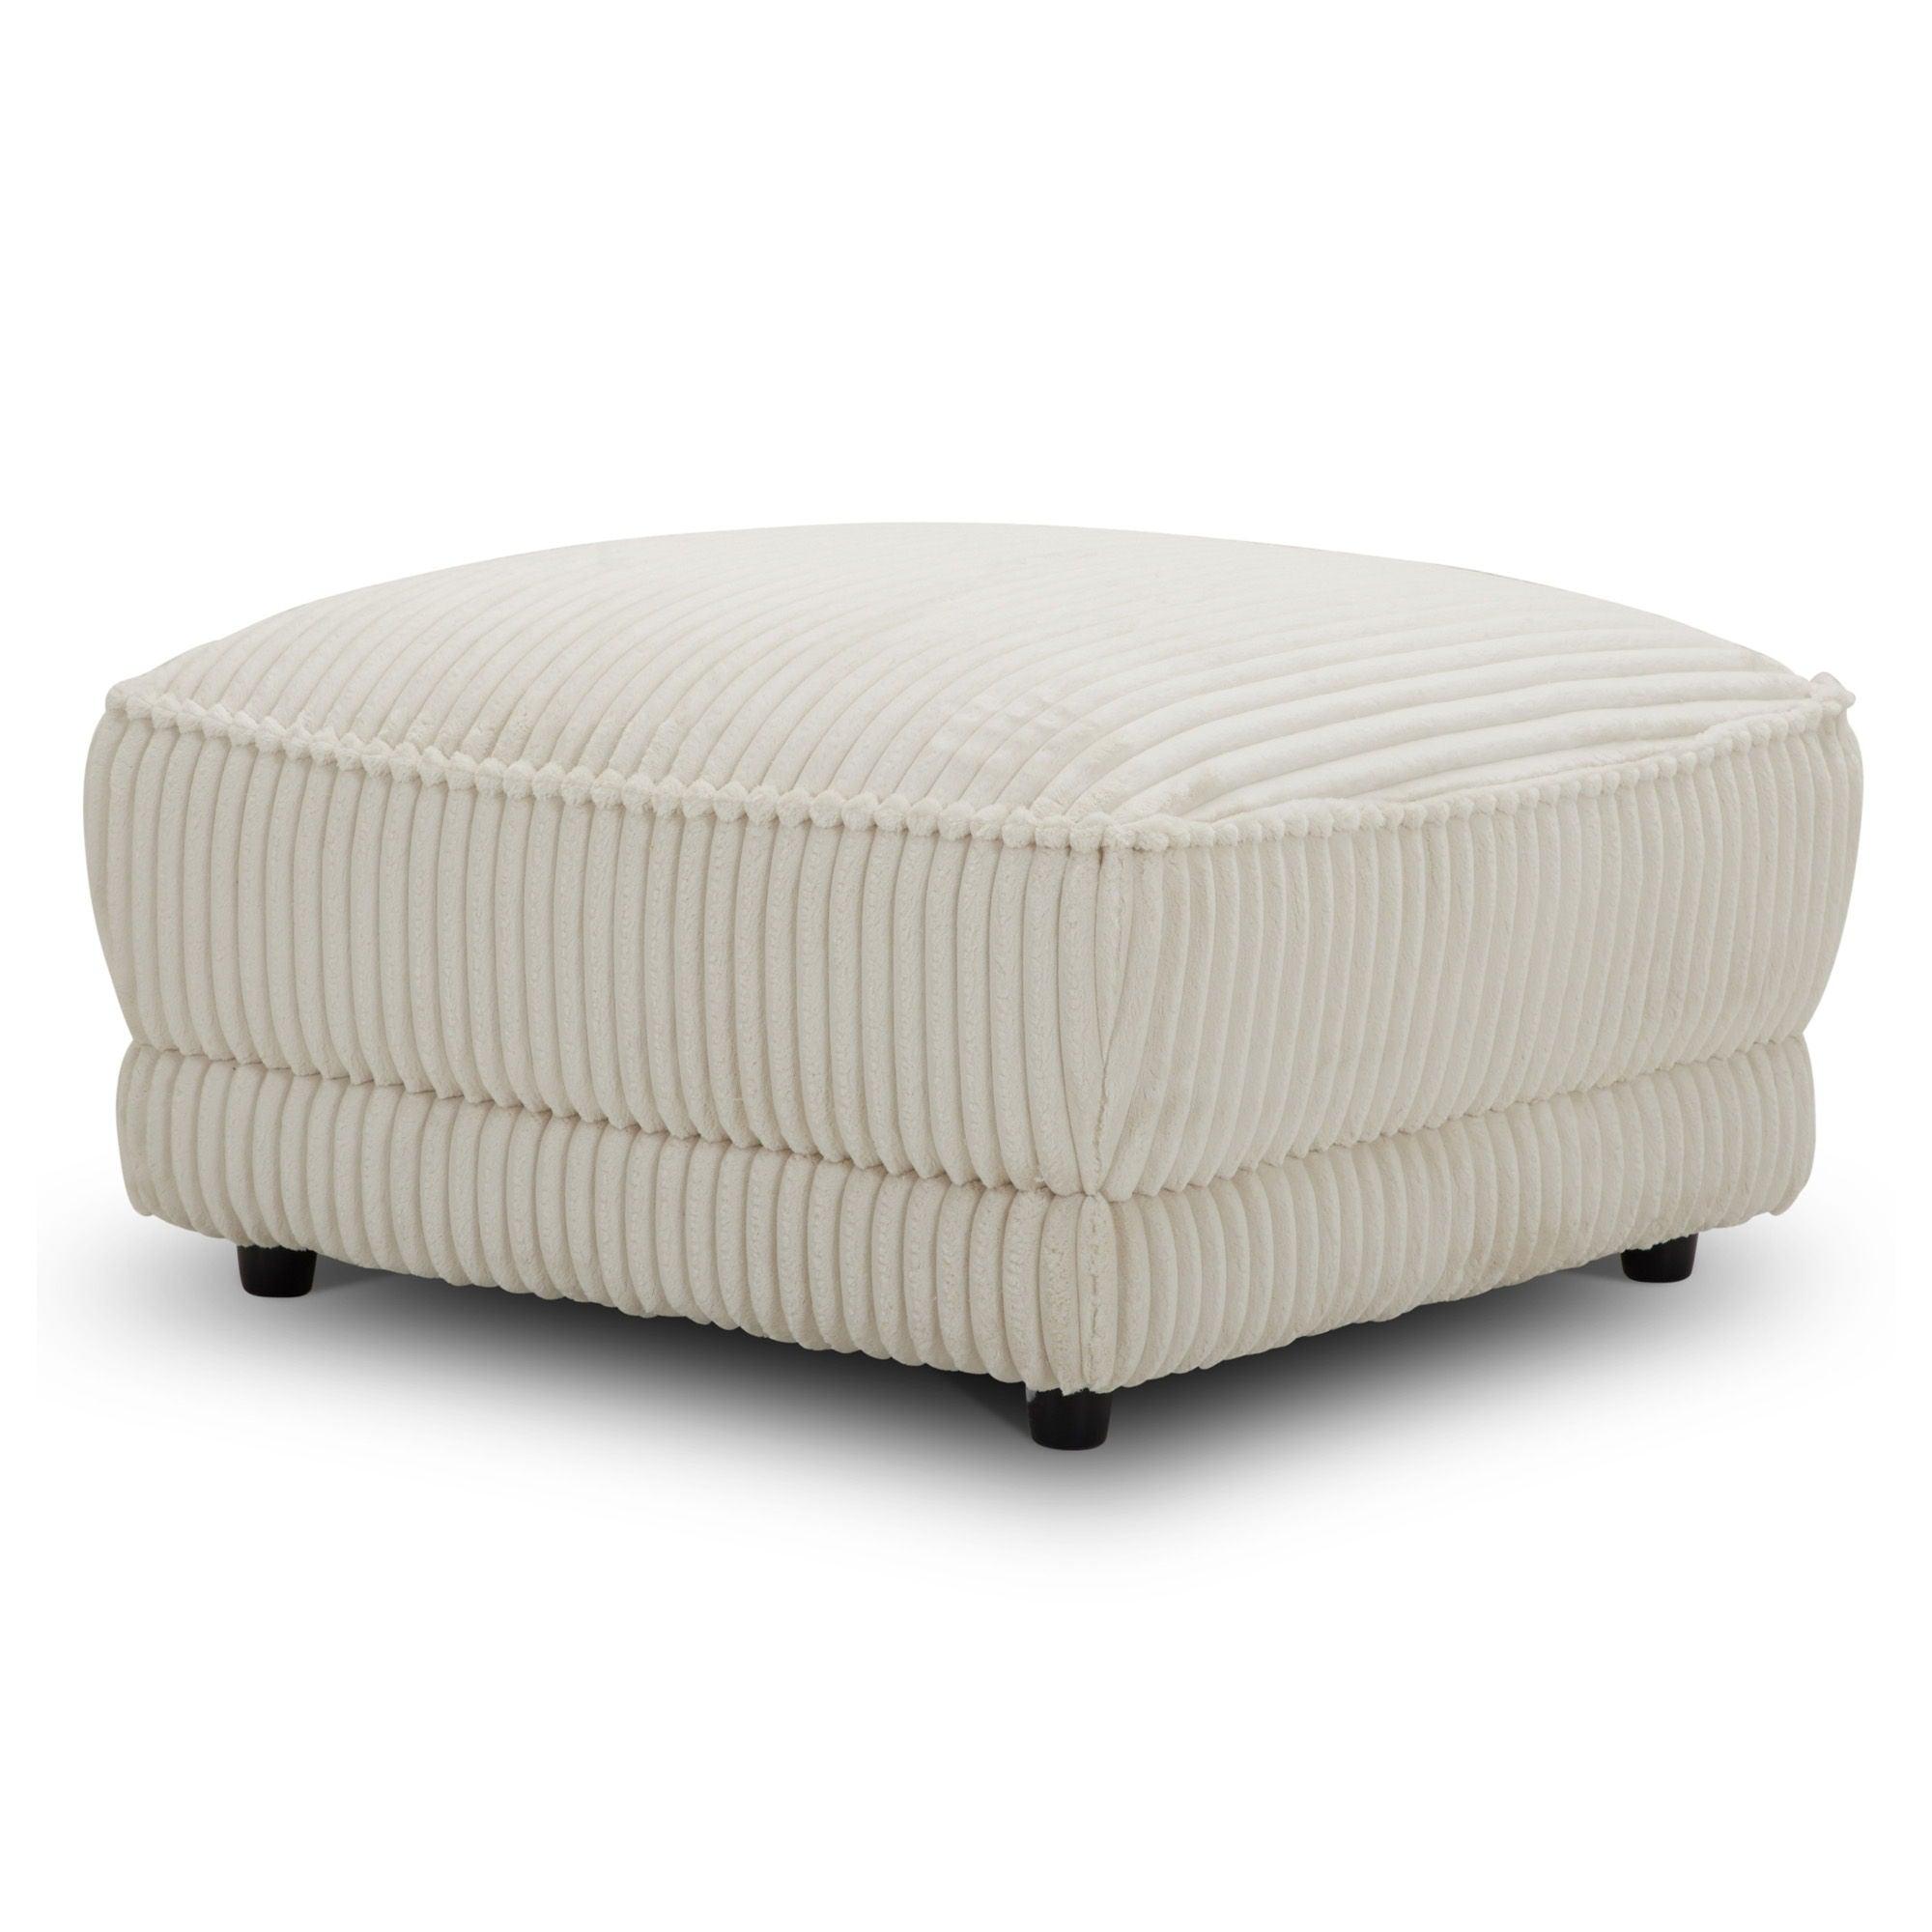 Parker Living - Utopia - Ottoman with Casters - Mega Ivory - 5th Avenue Furniture